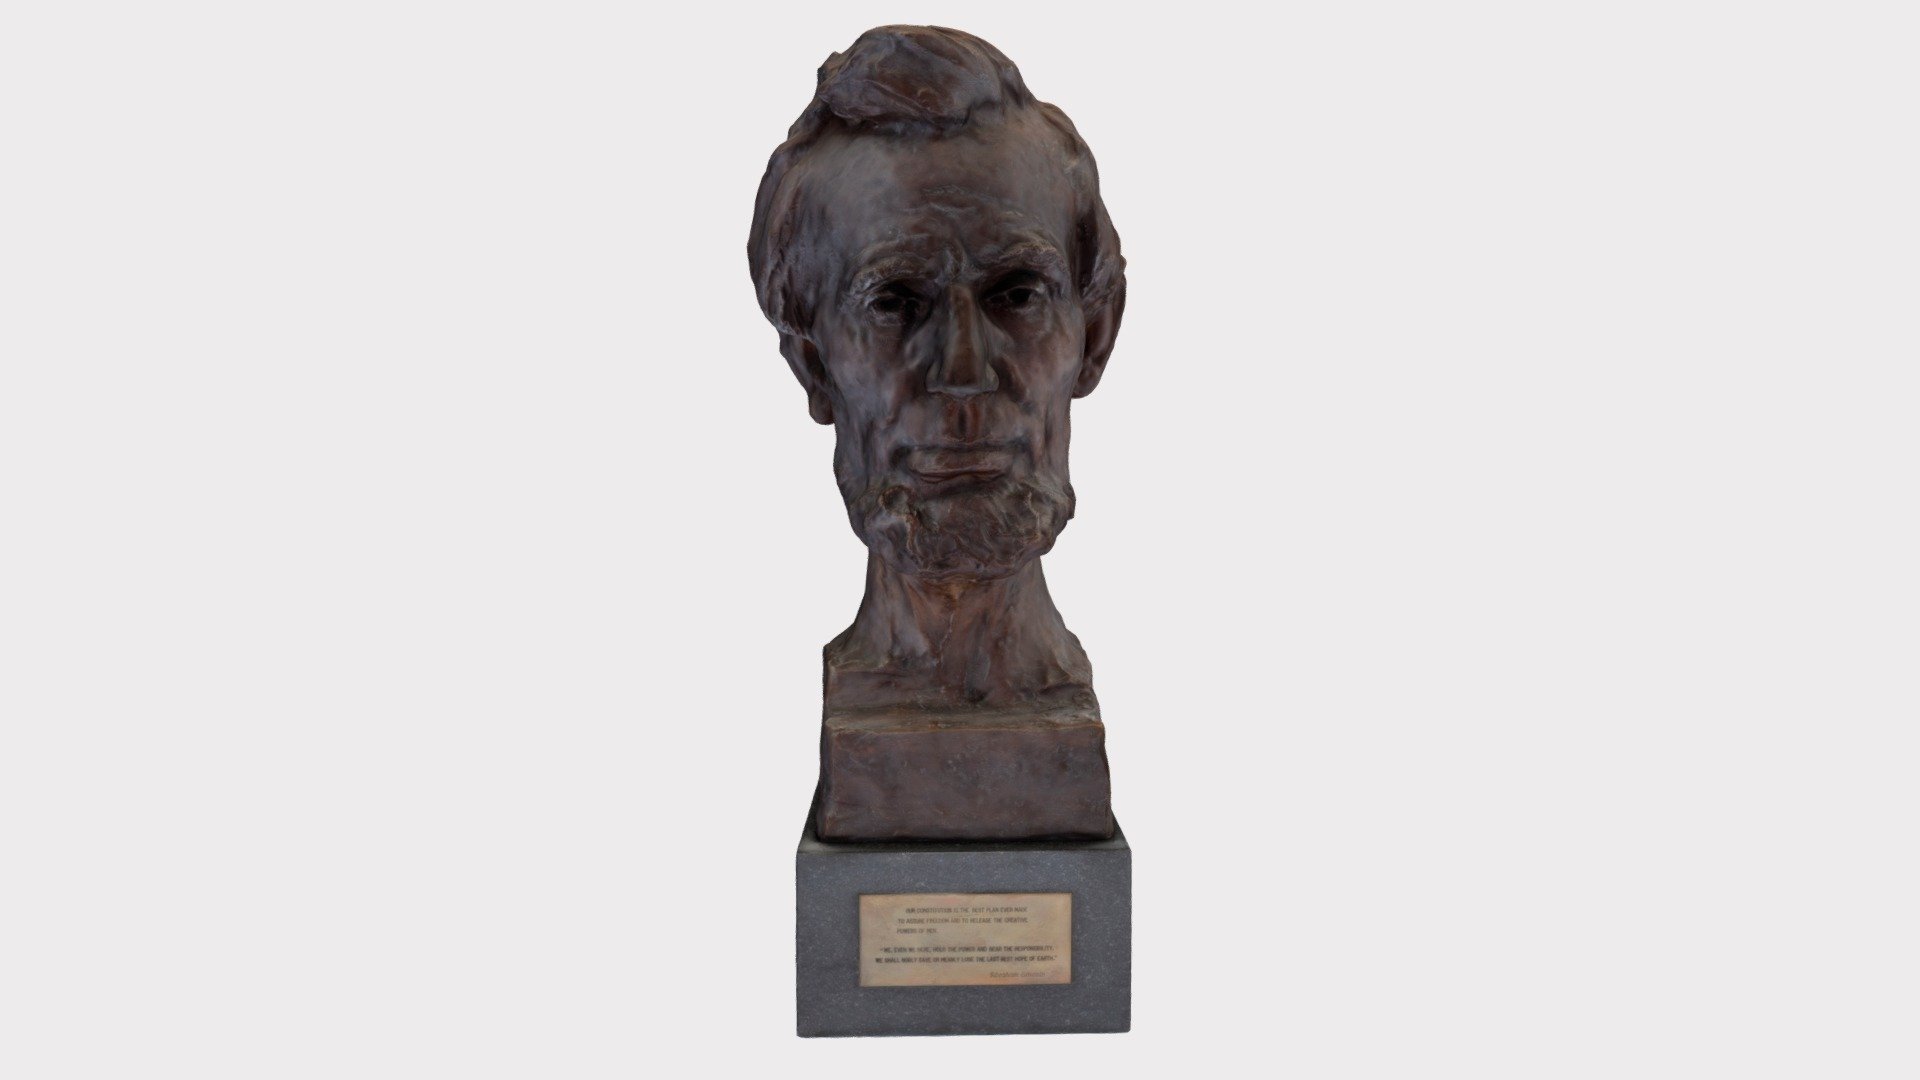 Bust of Abraham Lincoln by Gutzon Borglum